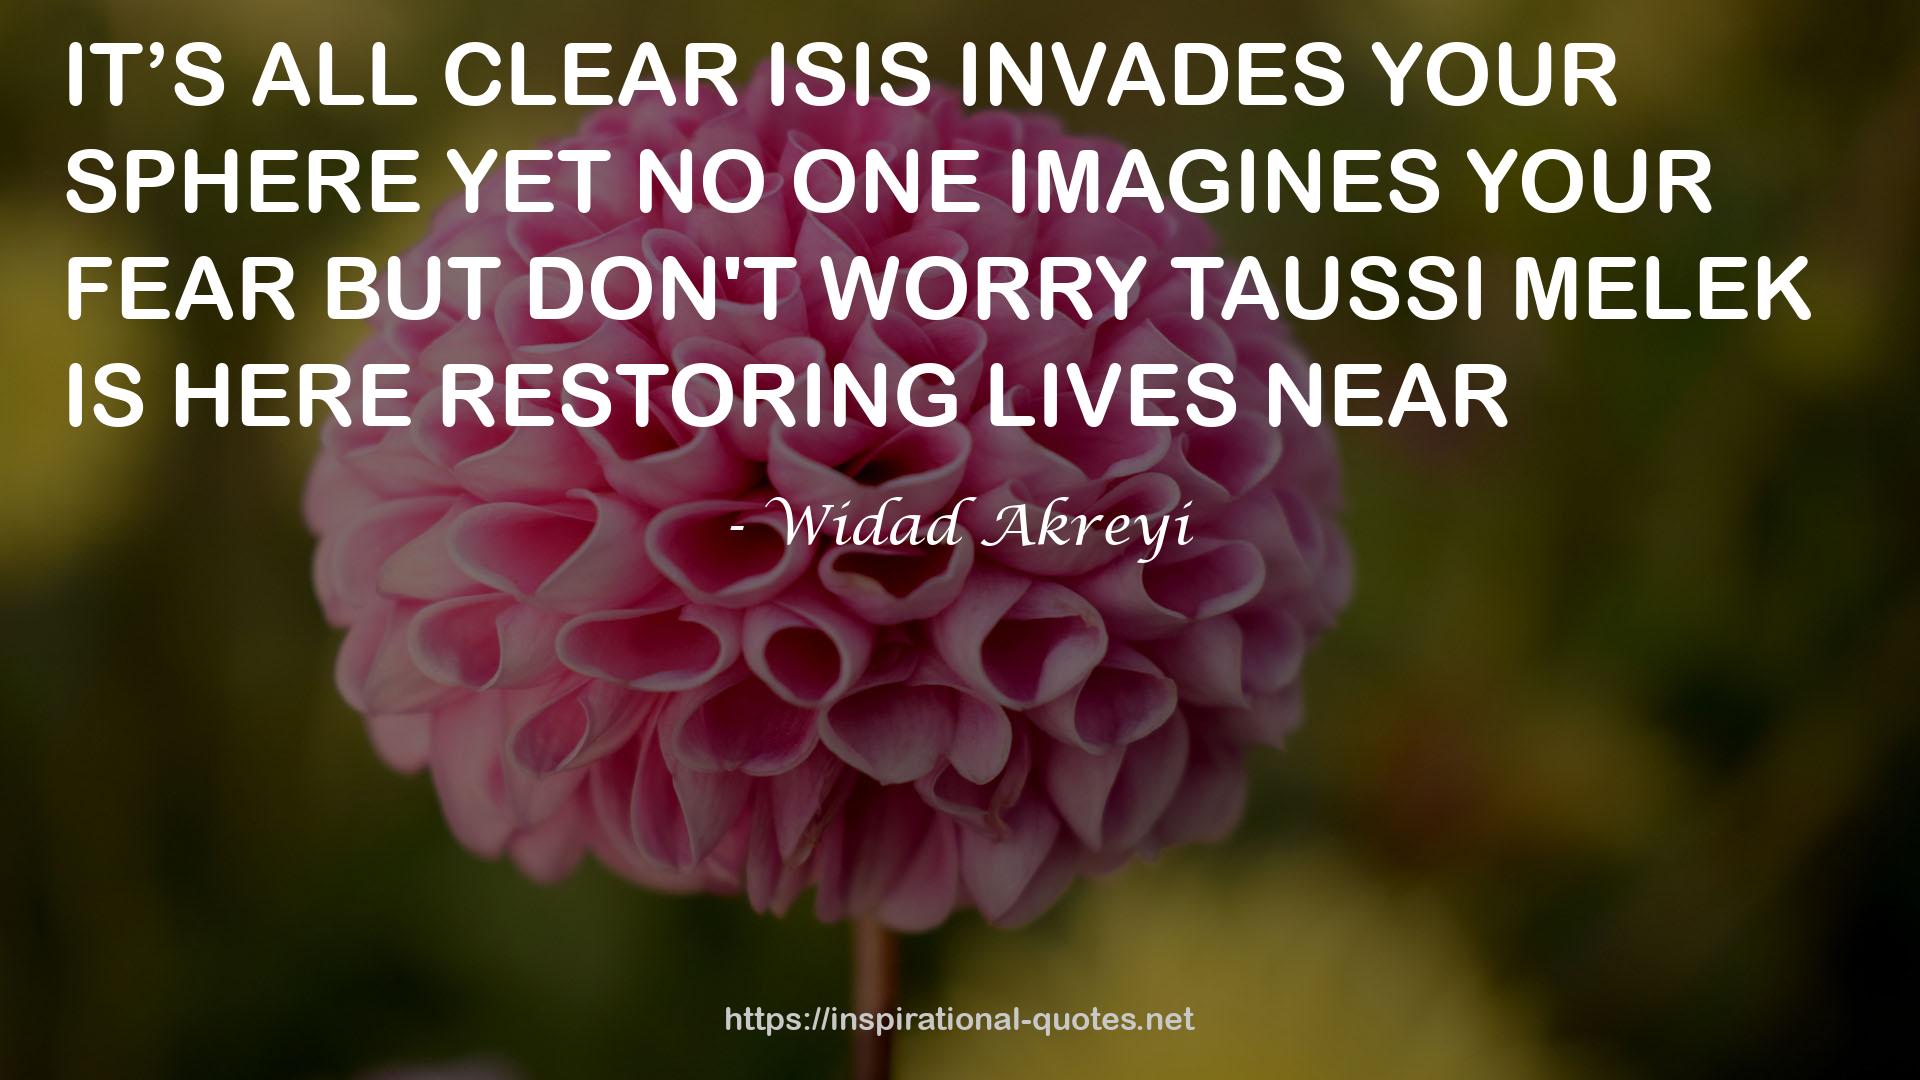 CLEARISIS  QUOTES